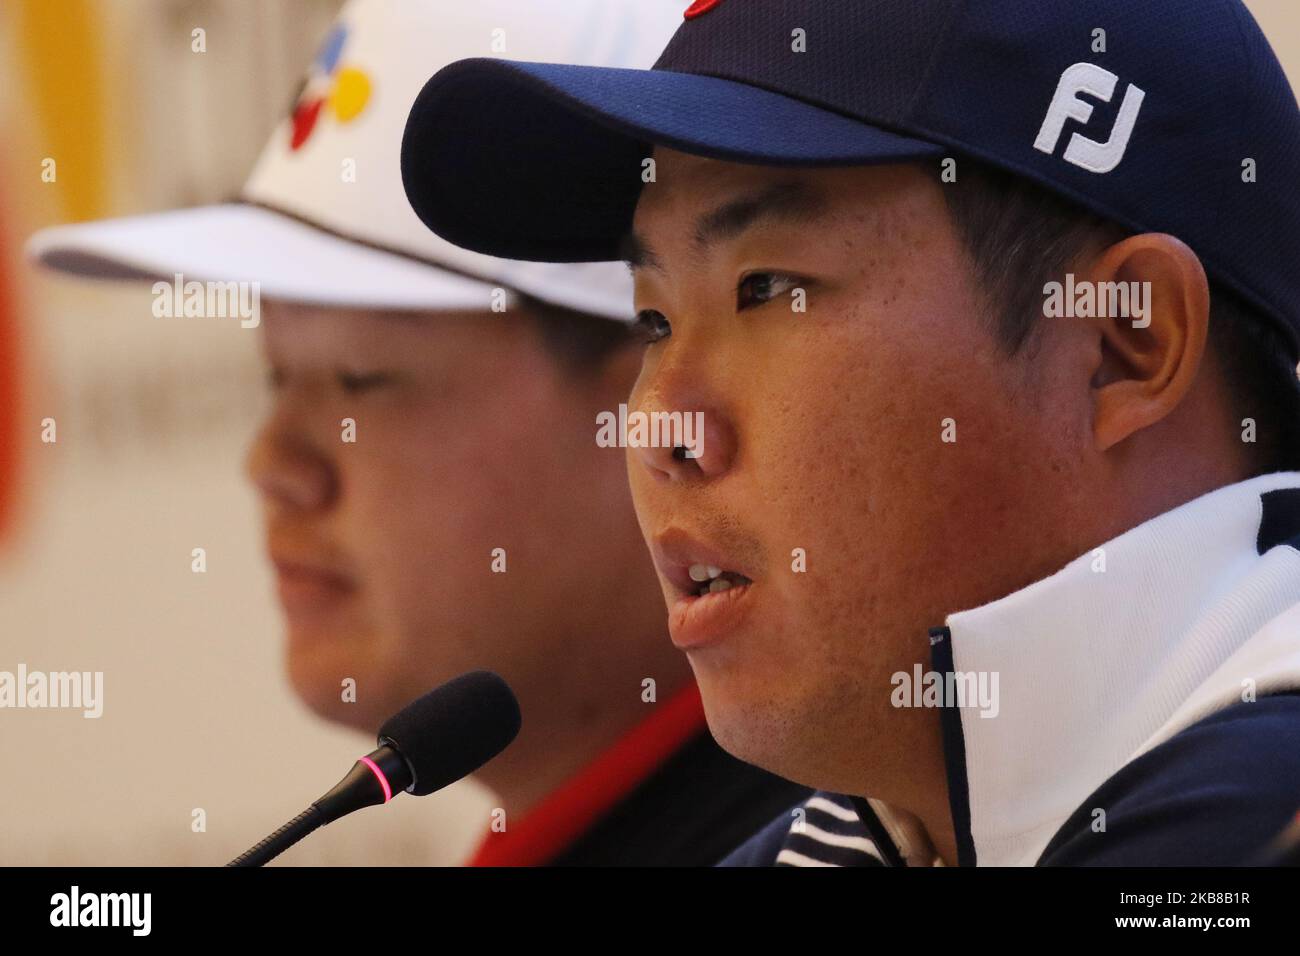 Byeong Hun Ahn of South Korea attend official interview at media center of Nine Bridge golf Club in Jeju, South Korea, on October 15, 2019. The CJ Cup Nine Bridges is every October held on PGA Tour Match. (Photo by Seung-il Ryu/NurPhoto) Stock Photo